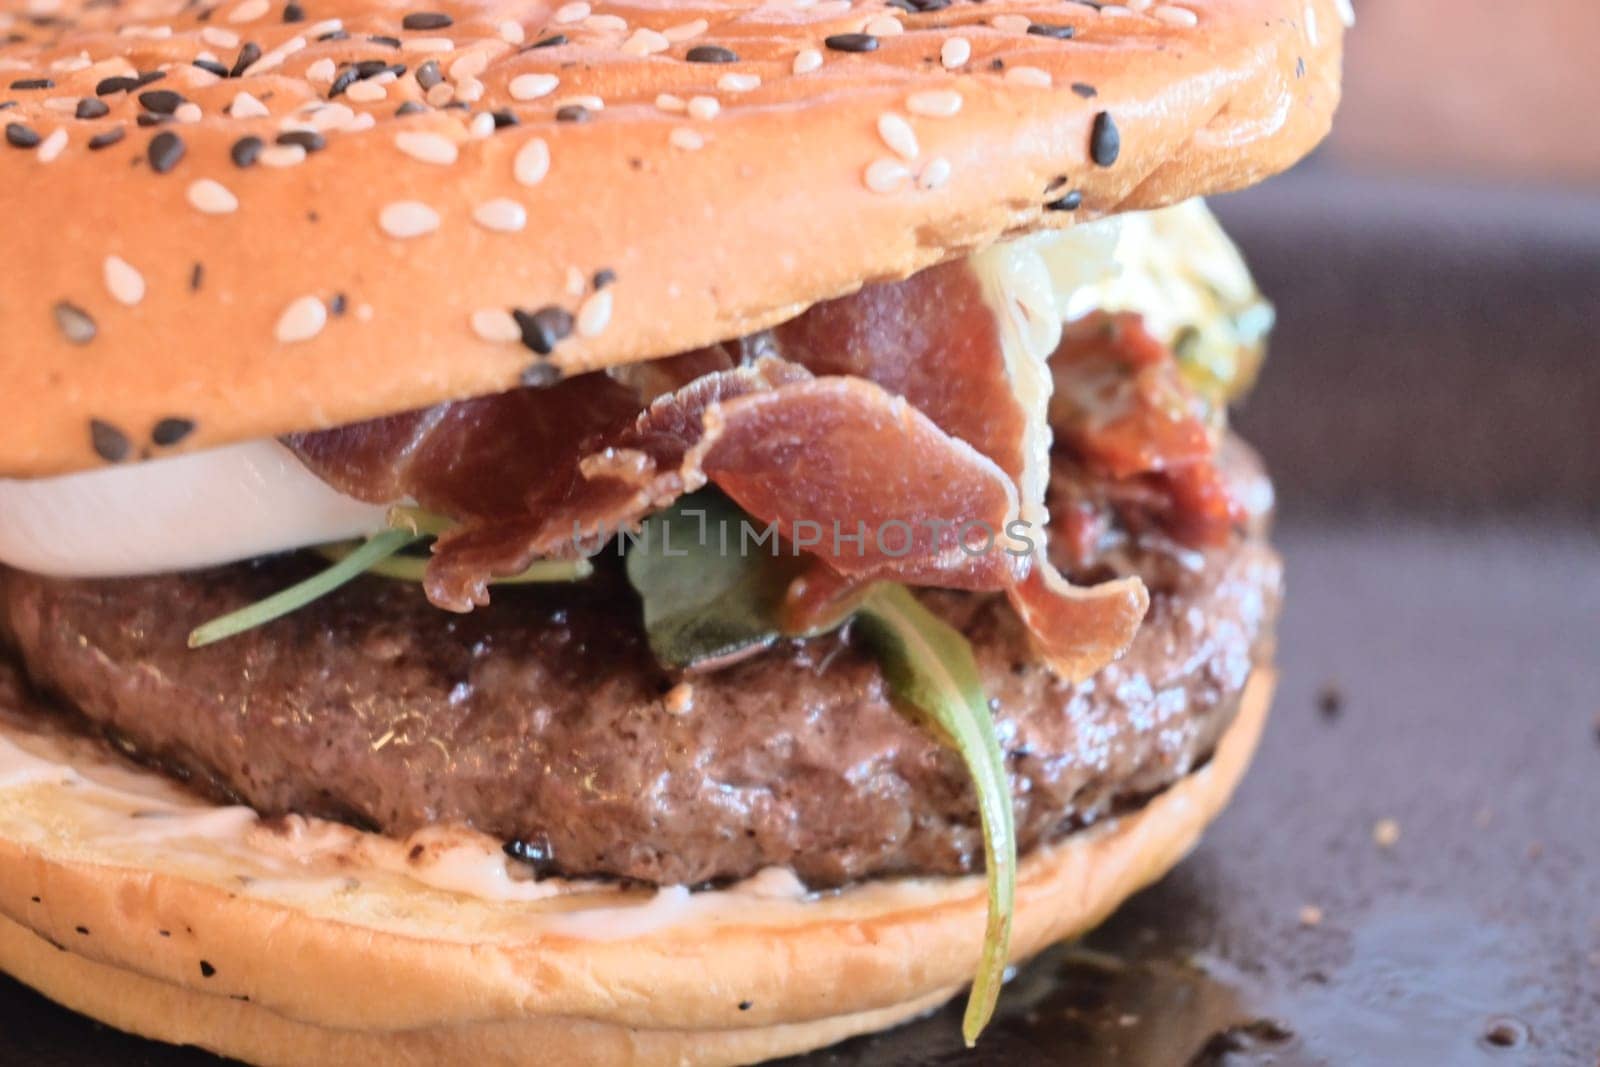 Beef Egg and Bacon Burger Served in Restaurant. American Food. Tasty Gourmet on Wooden Table.